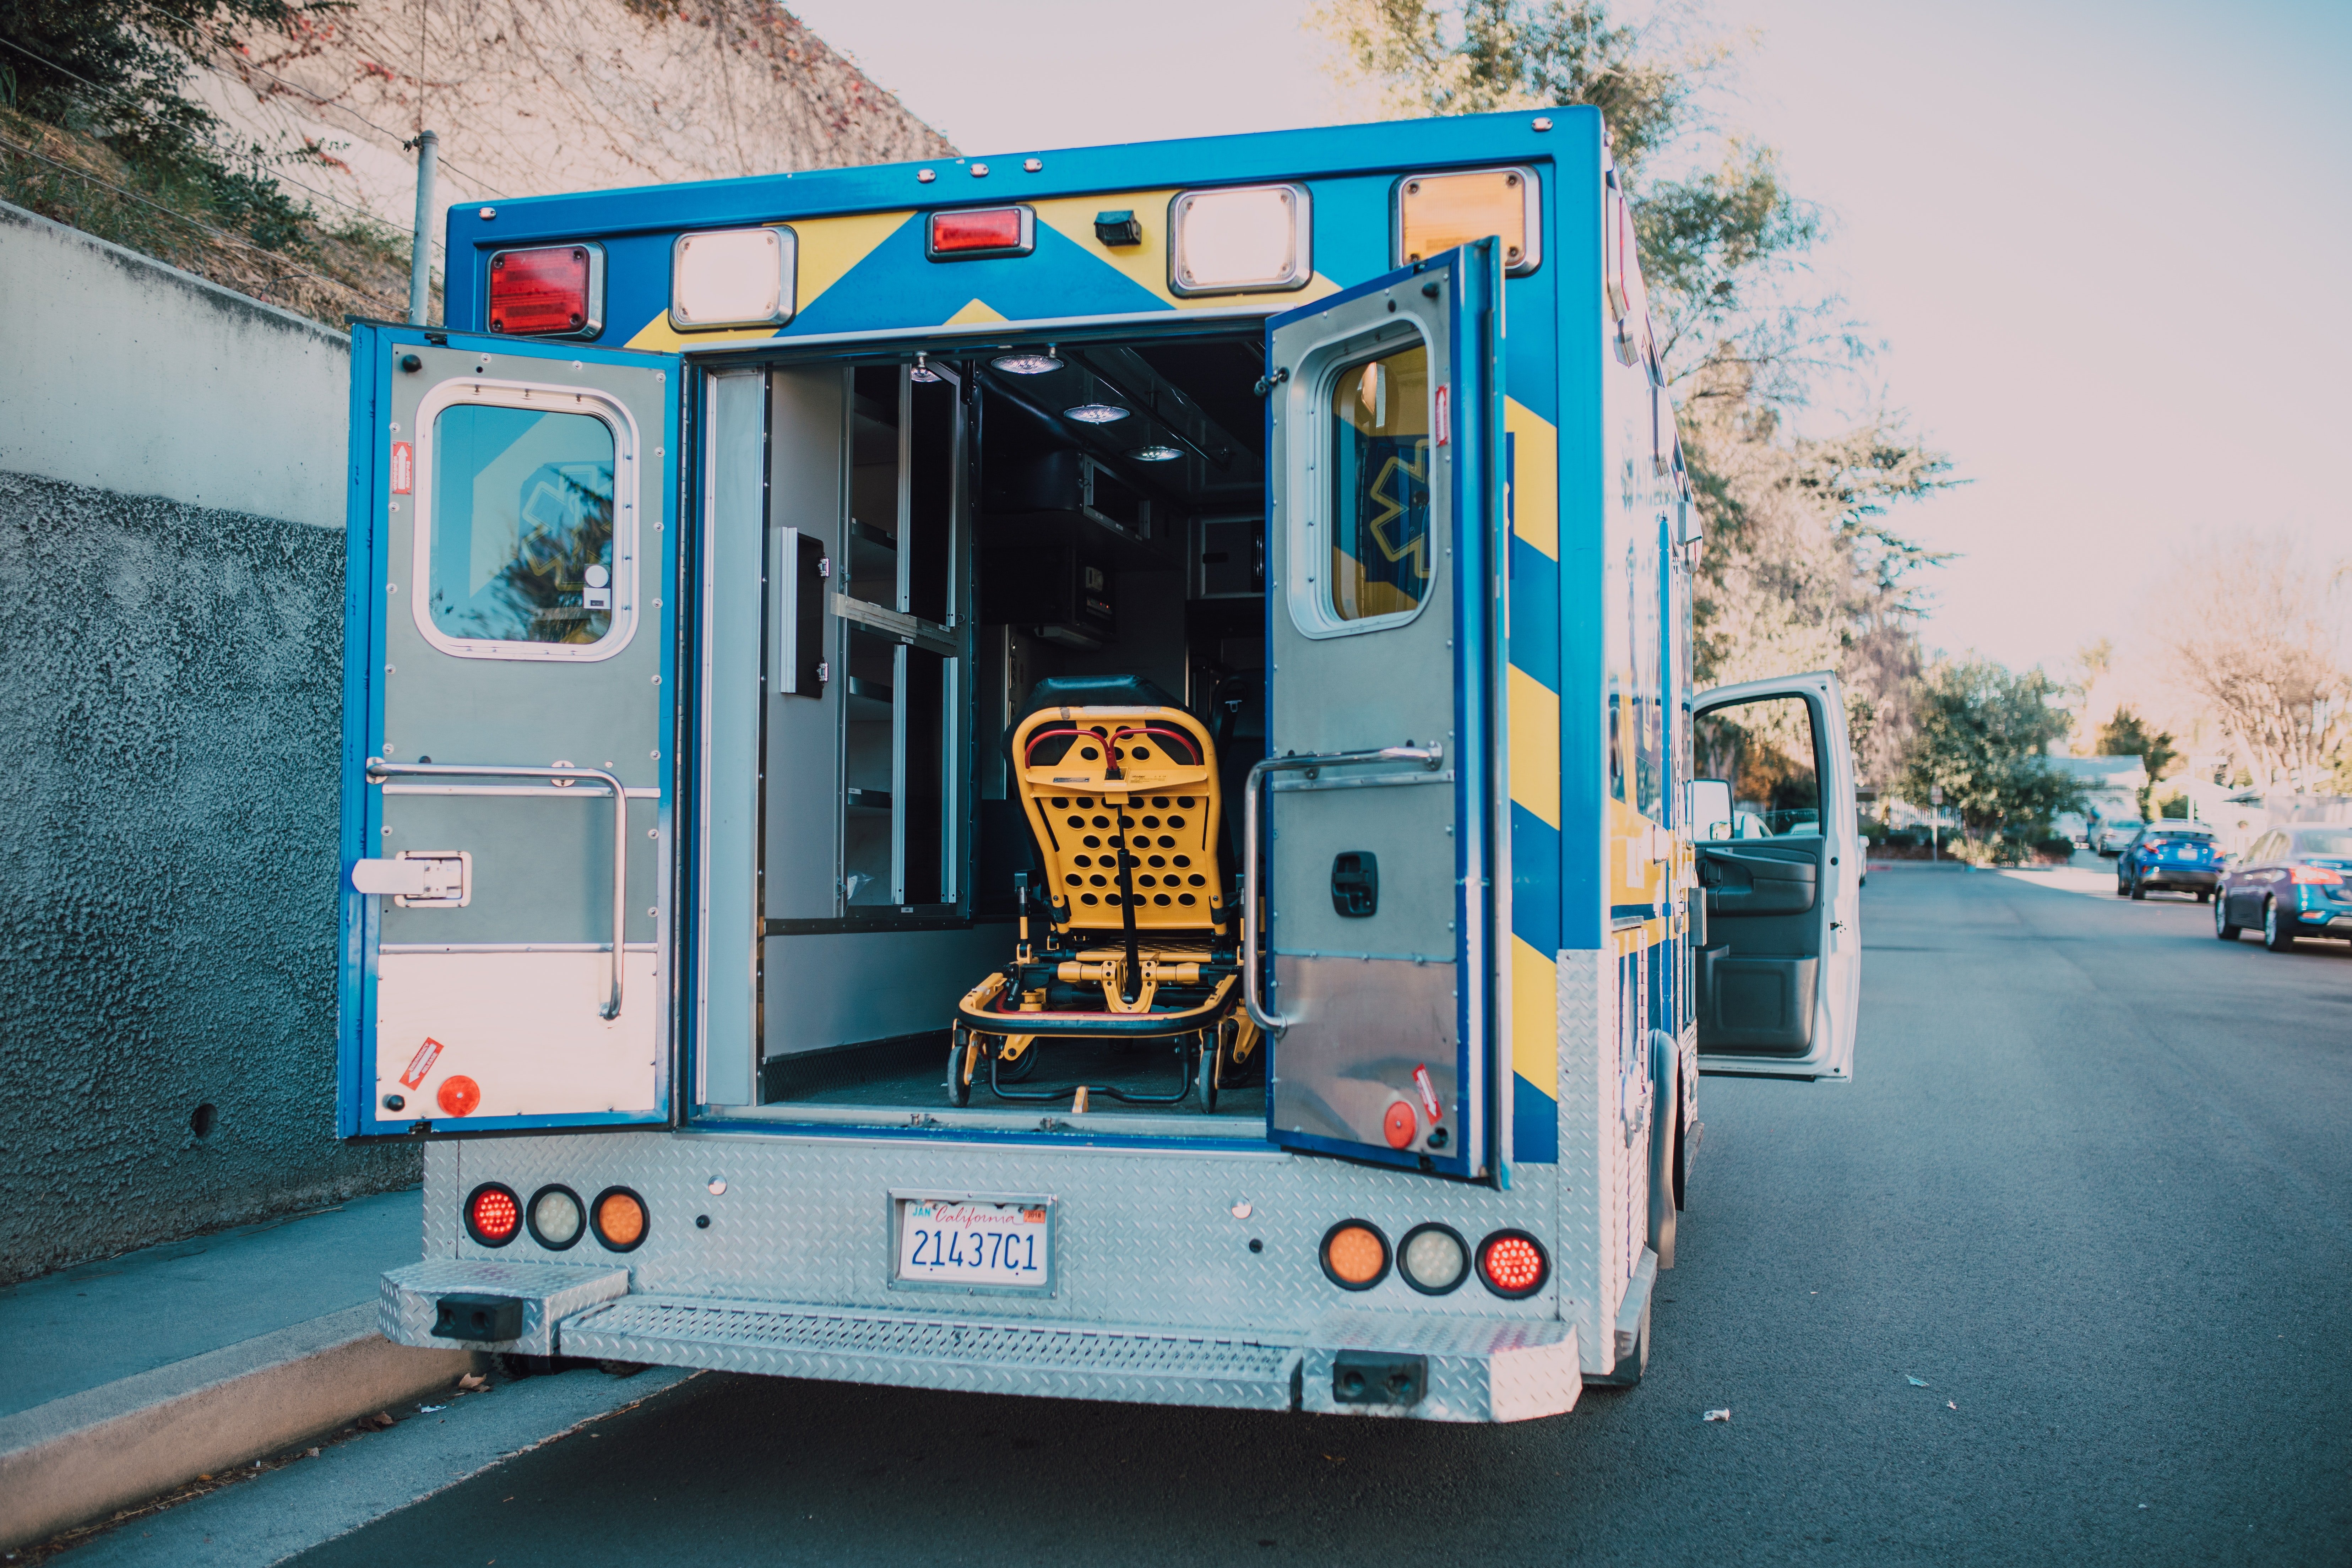 The back of an ambulance is open and ready for its next patient | Photo: Pexels/RODNAE Productions